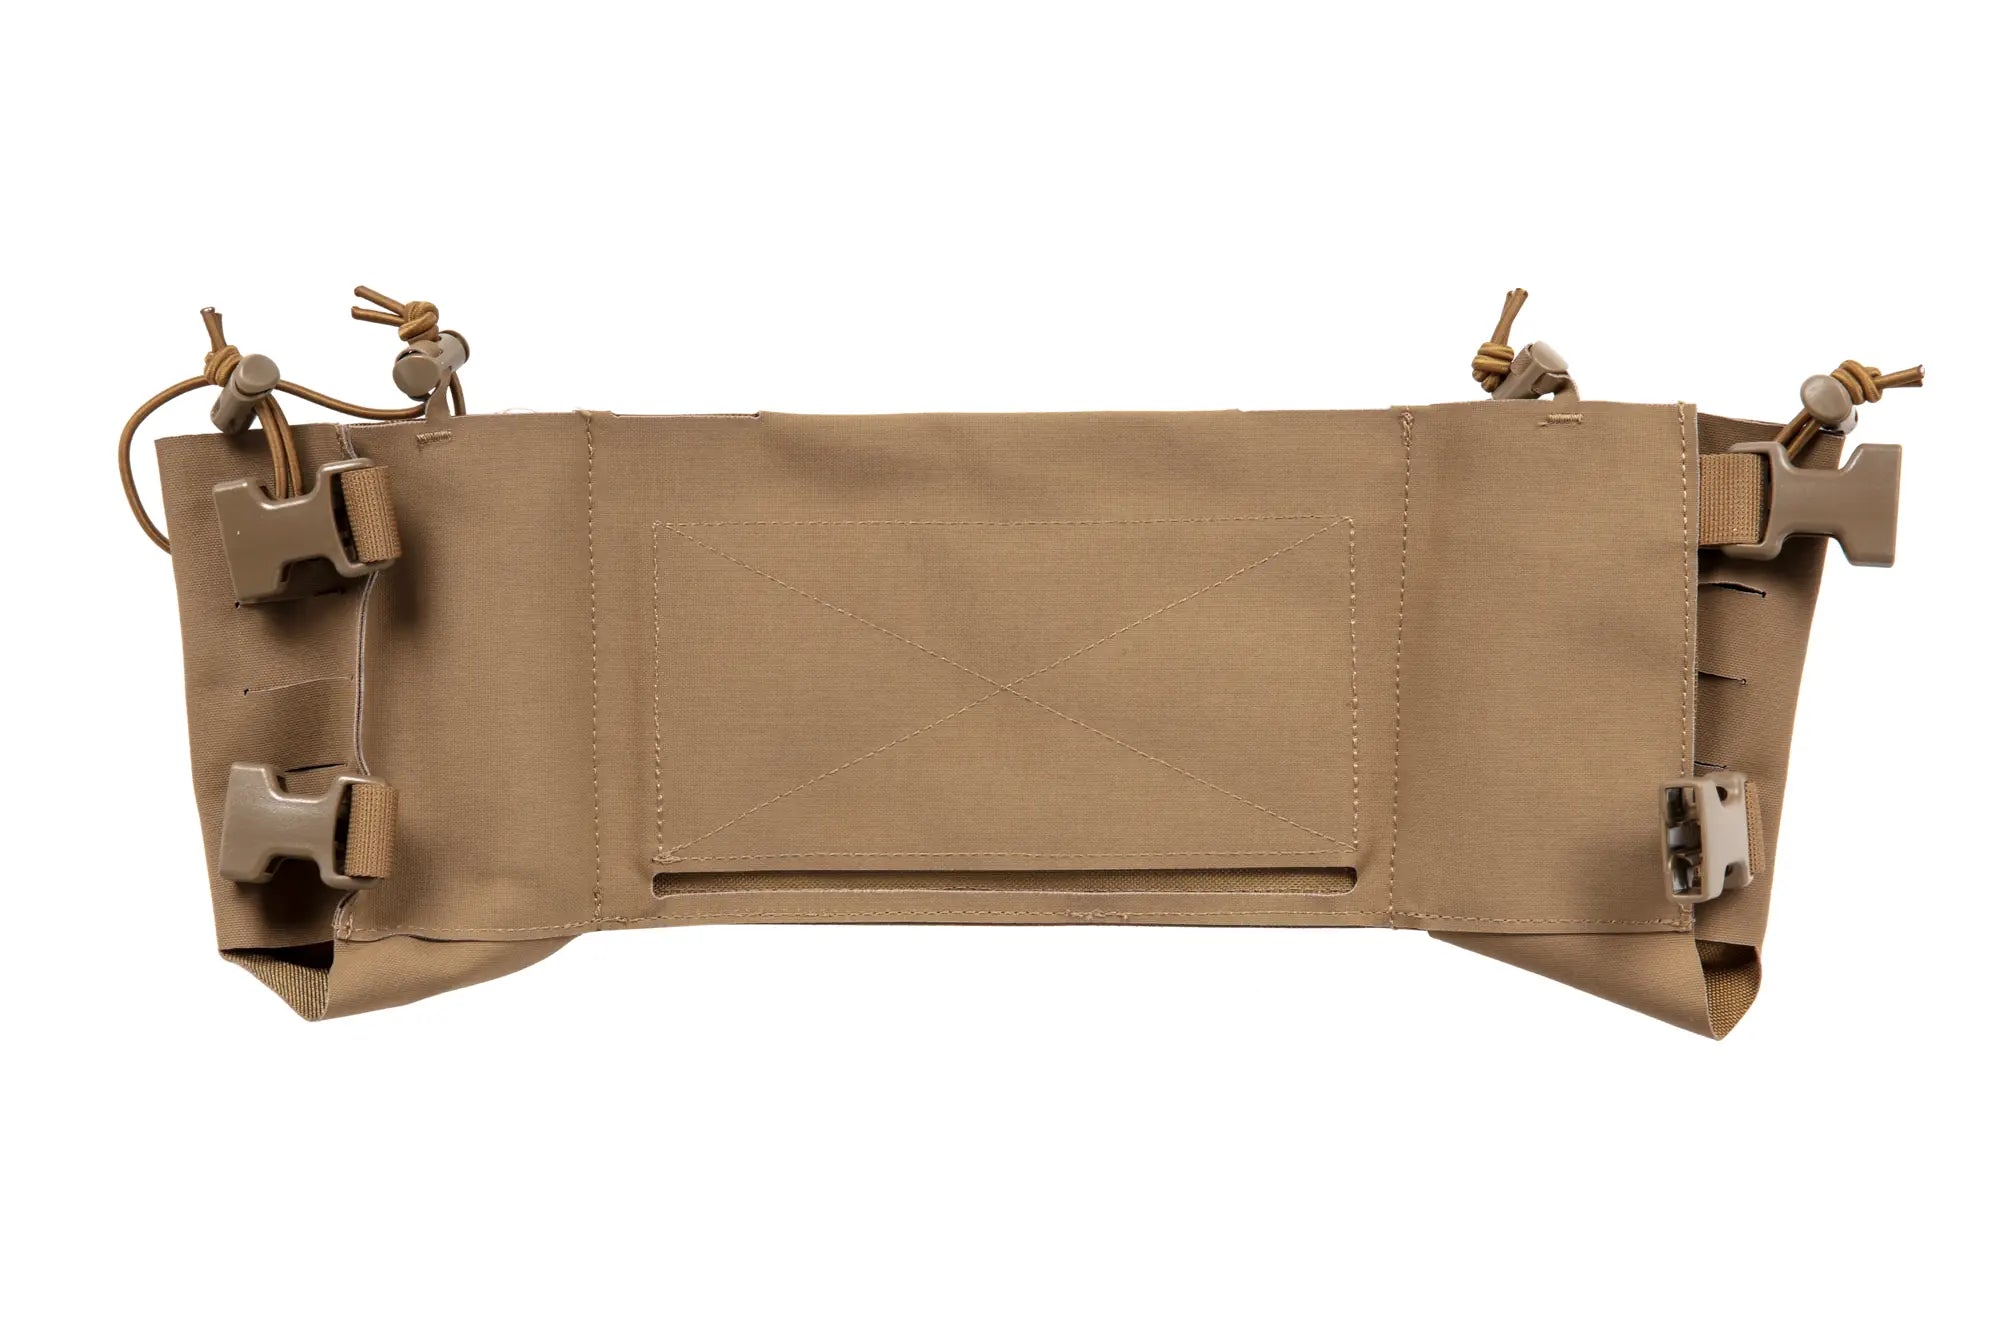 Wosport Chassis I administration panel for the Chest Rig MK4 Coyote Brown waistcoat